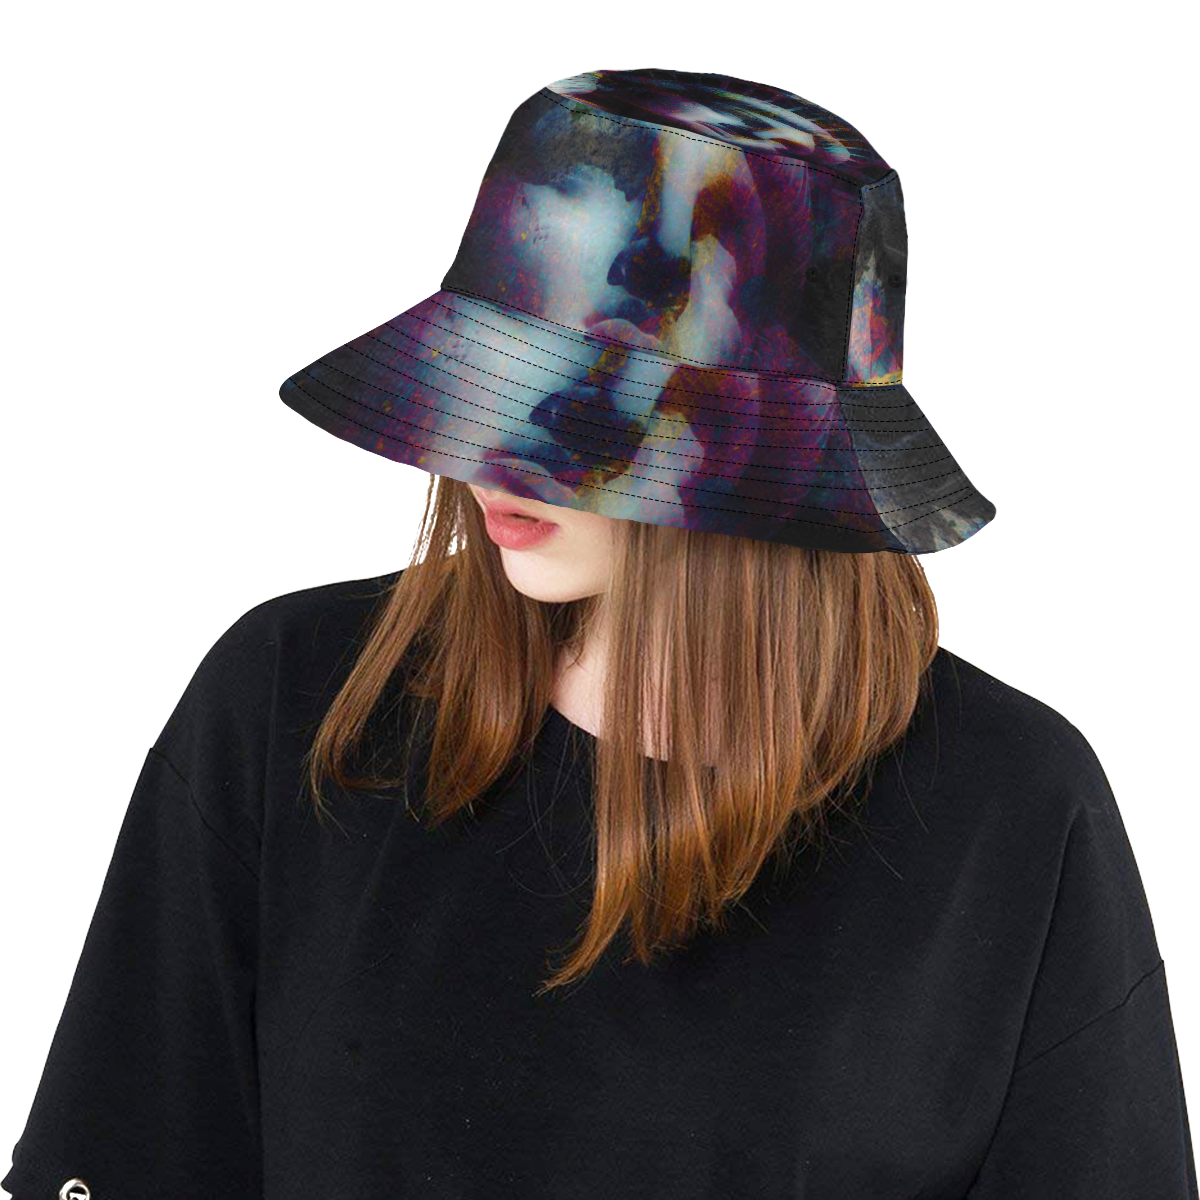 STATUE OF LIBERTY 5 LARGE All Over Print Bucket Hat